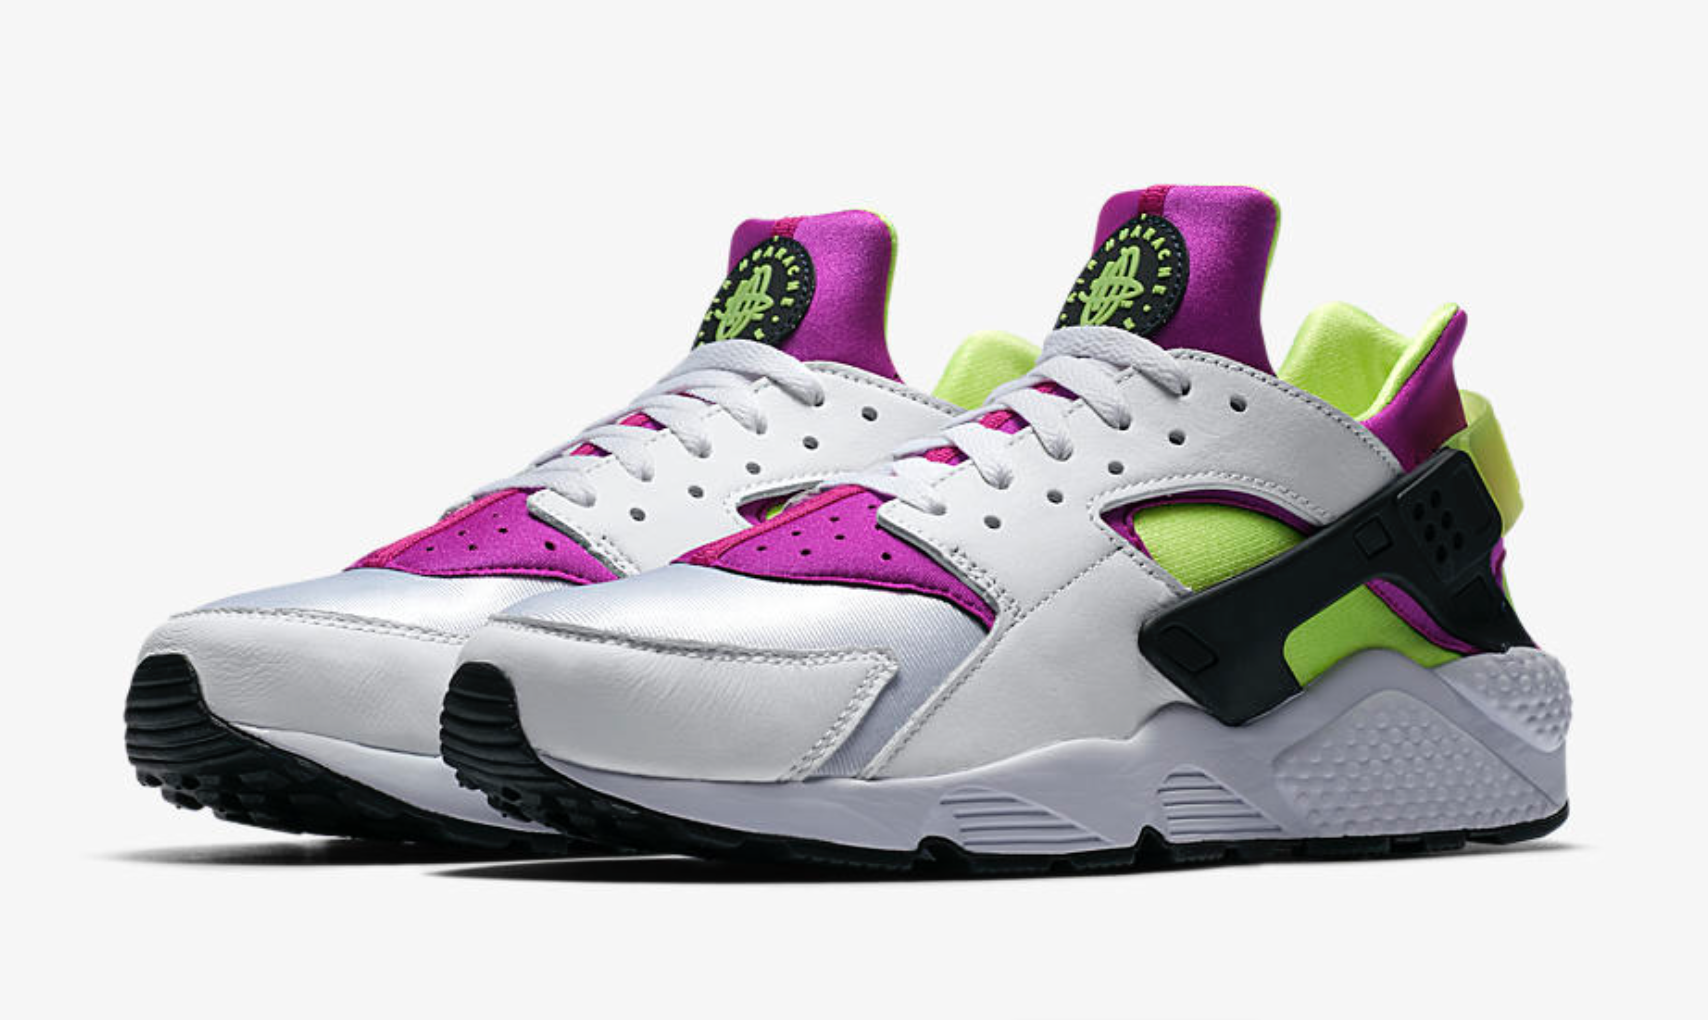 first huaraches ever made